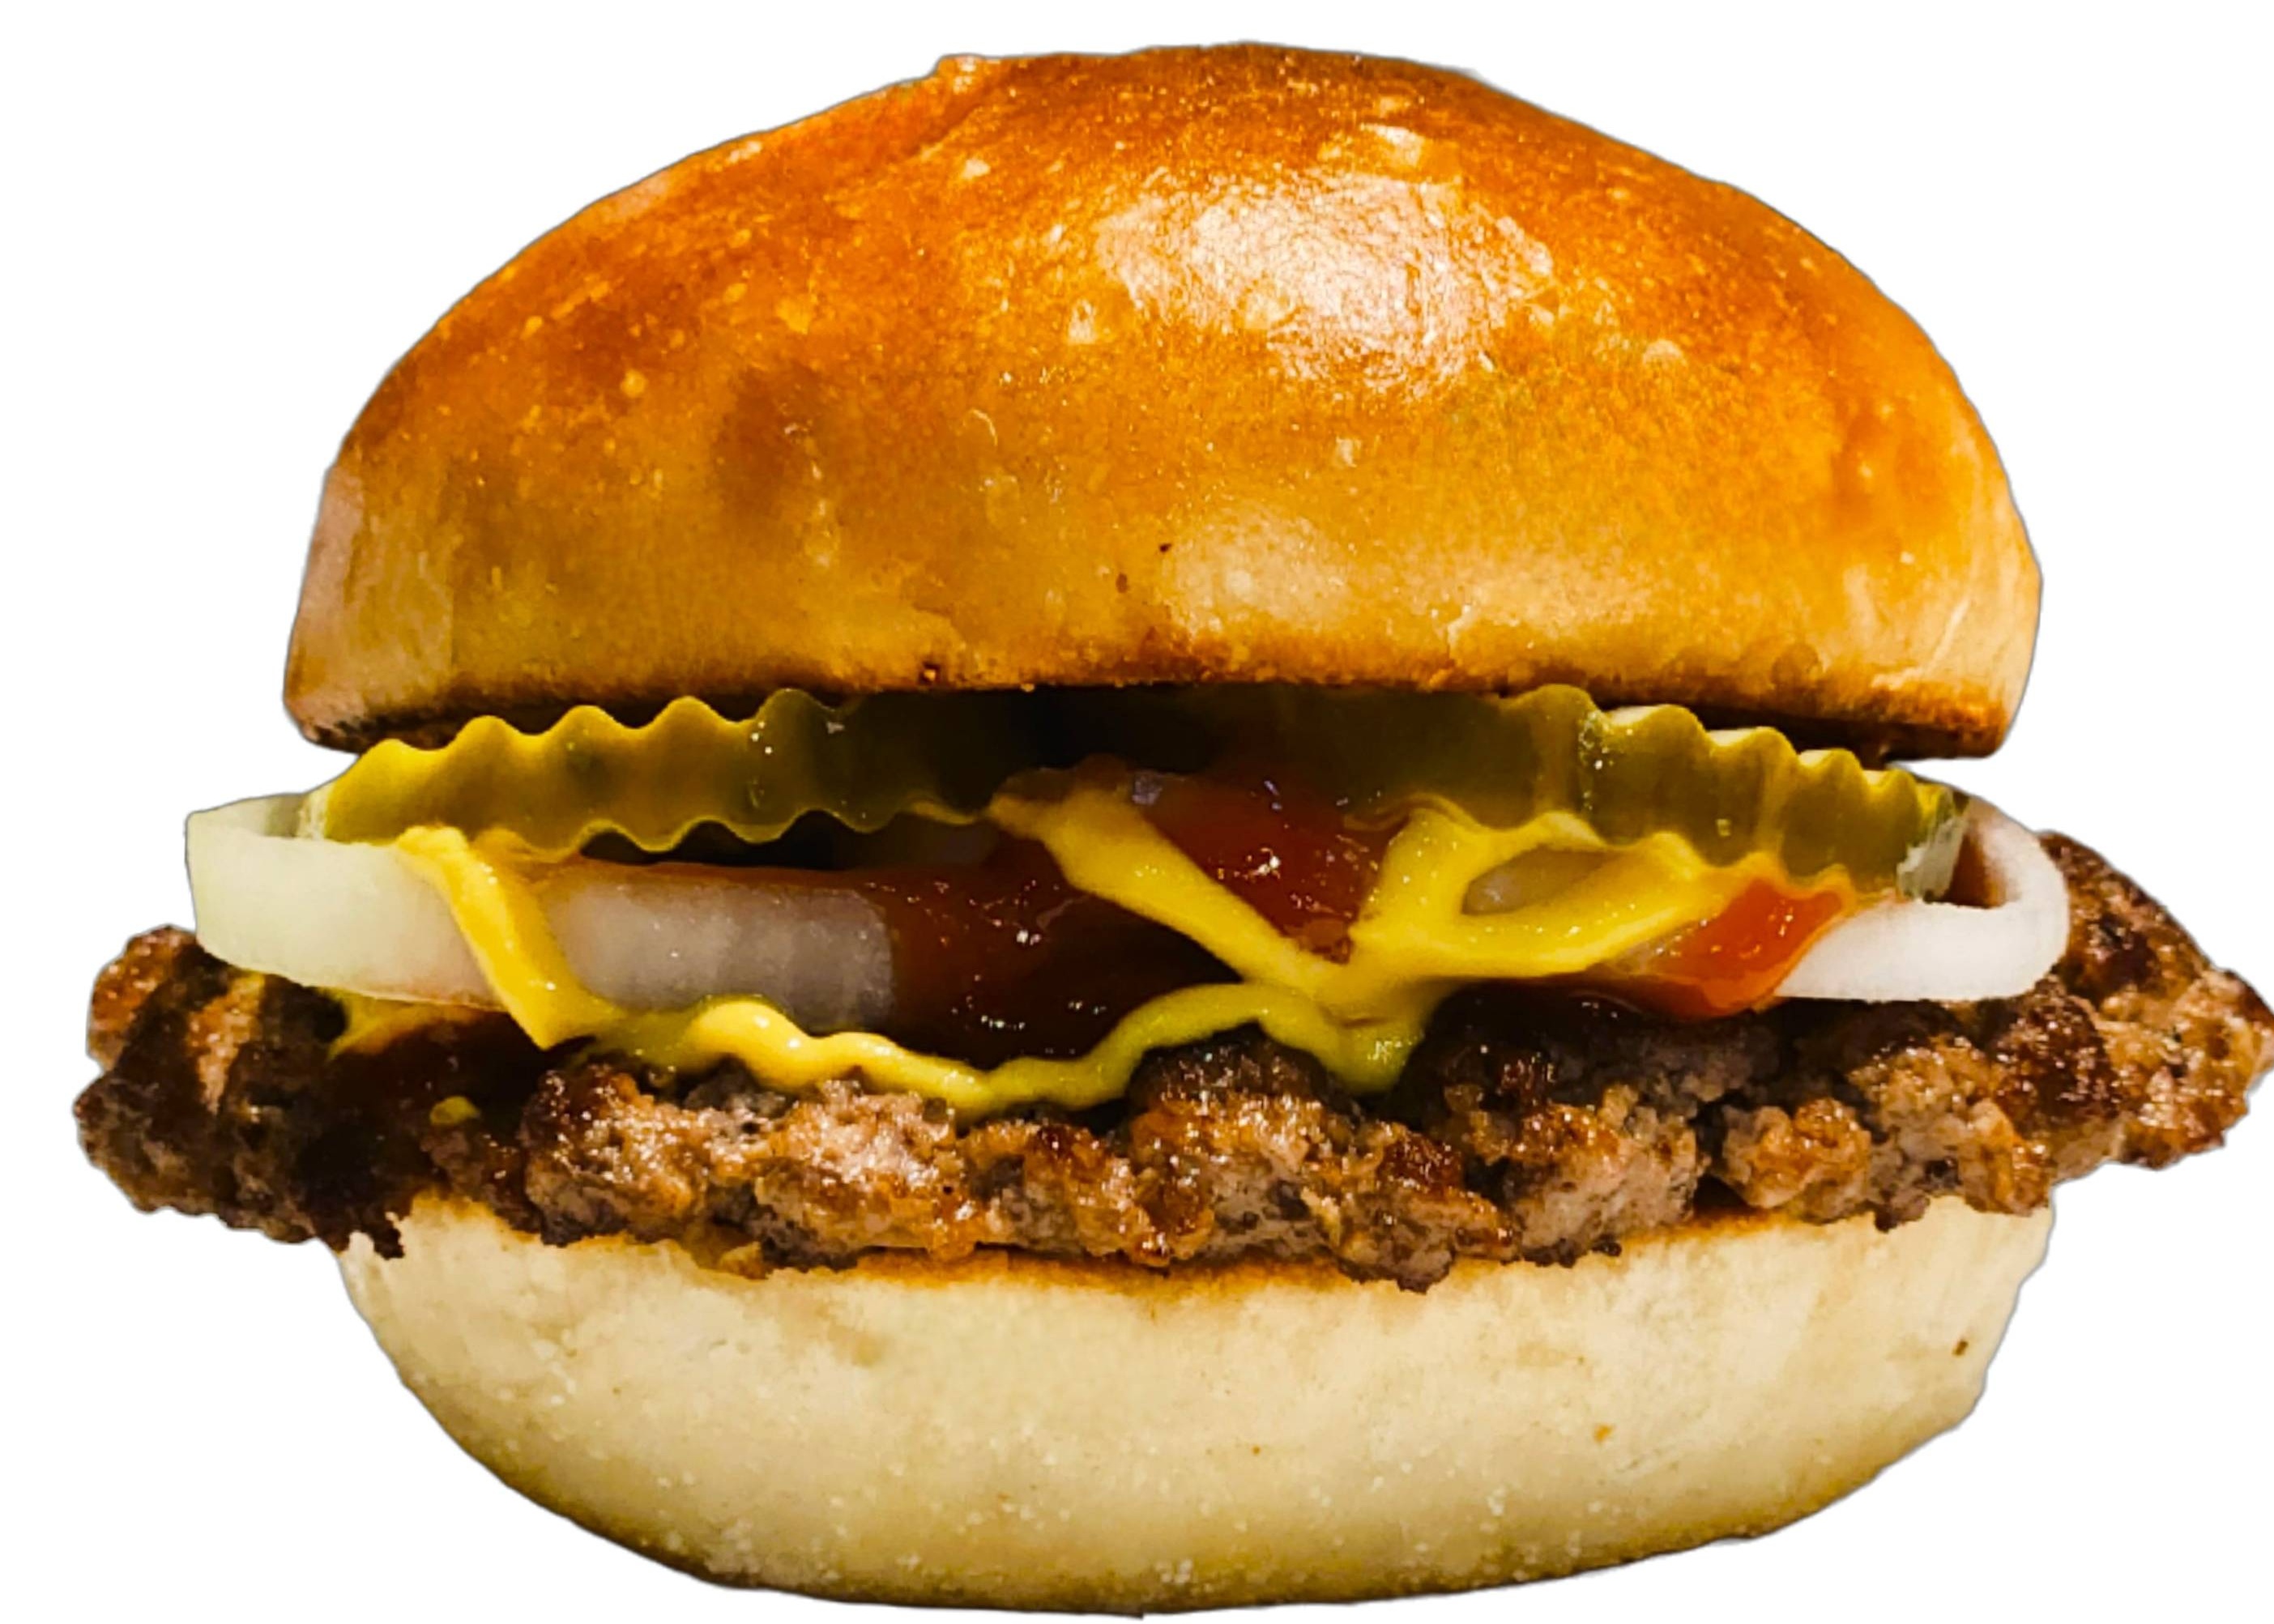 Buy 1, Get 1 FREE: The Classic Chuck Burger